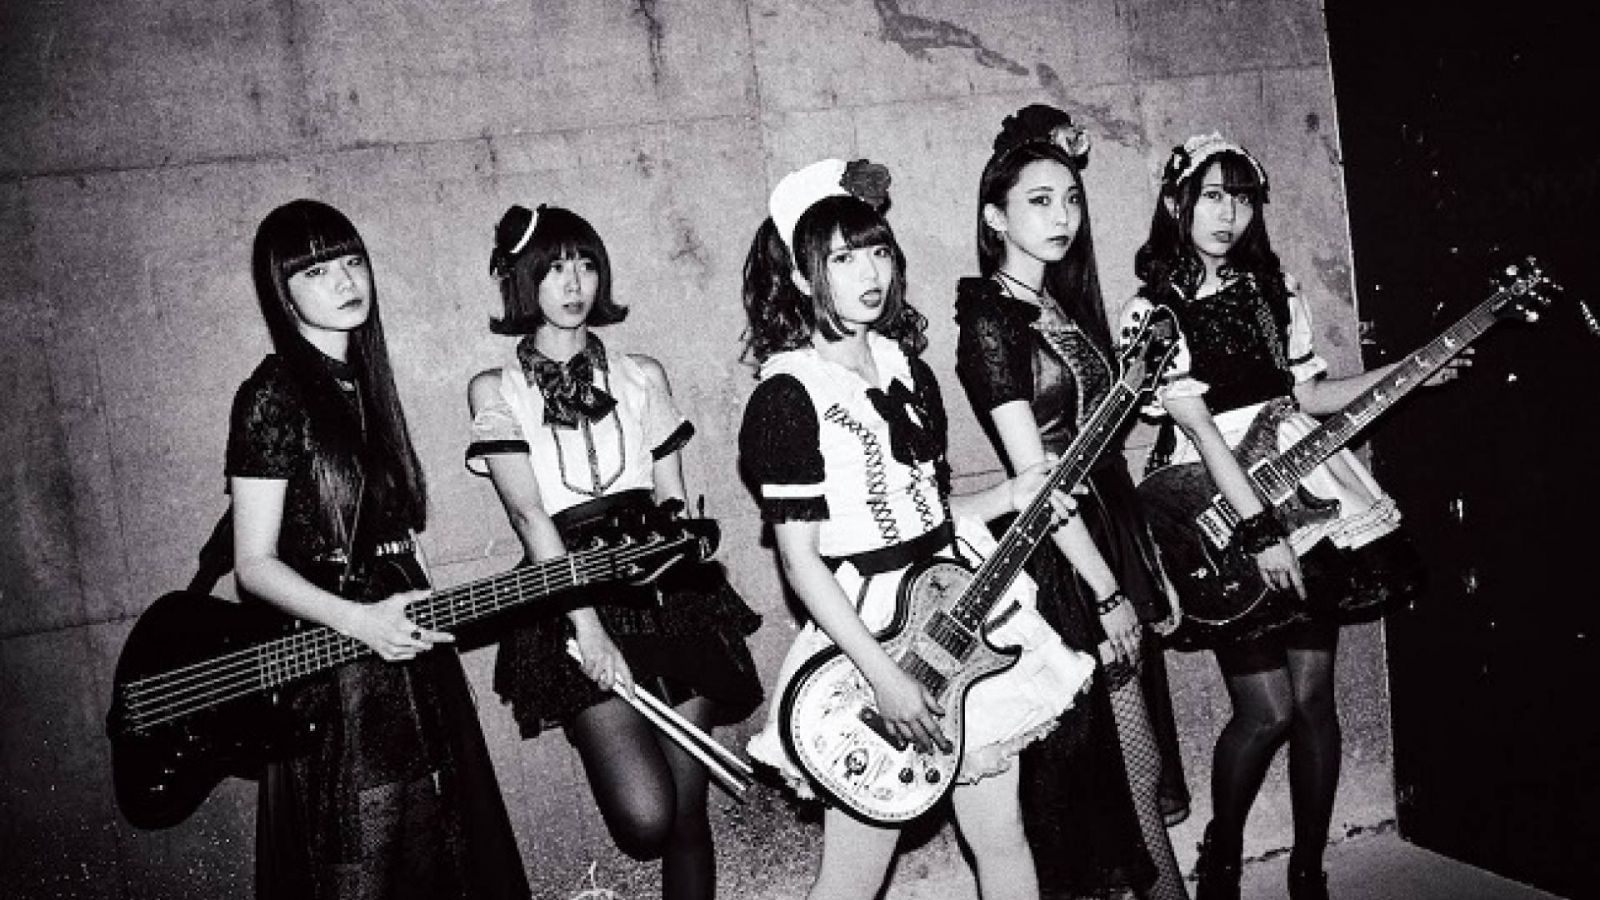 BAND-MAID - start over © PLATINUM PASSPORT. All Rights Reserved.